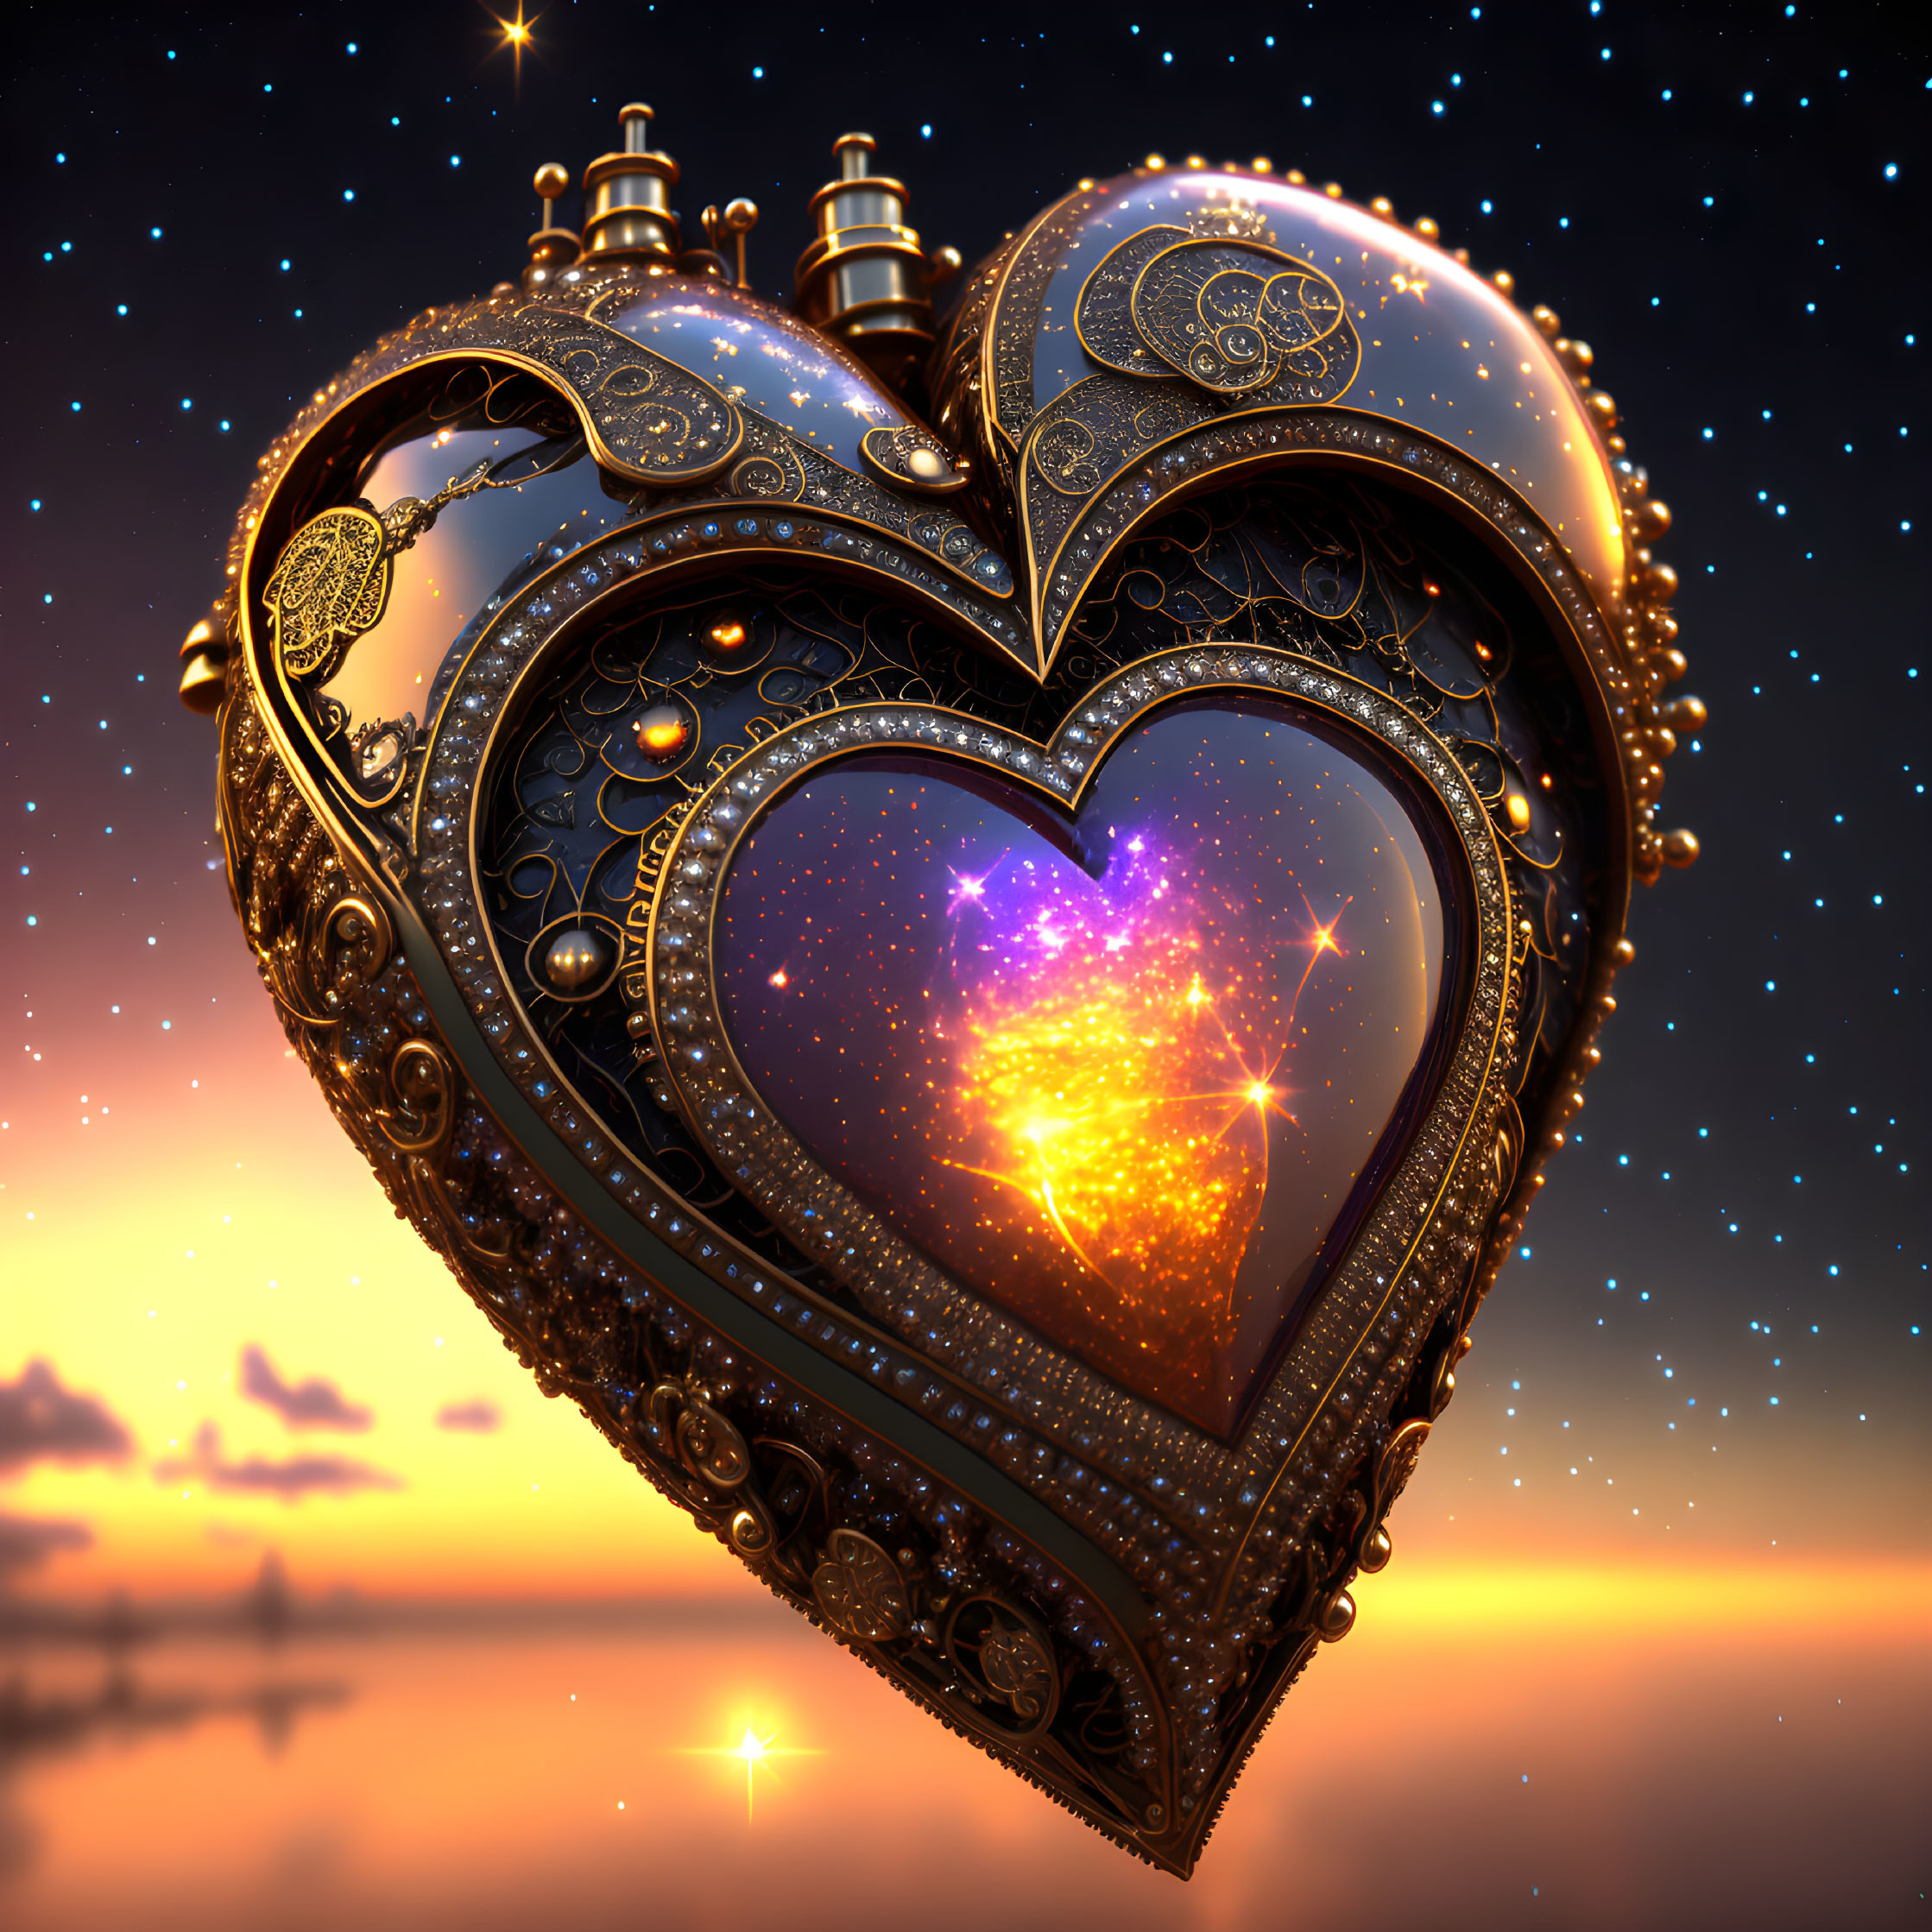 Heart-shaped locket with cosmic star-filled center on twilight sky background